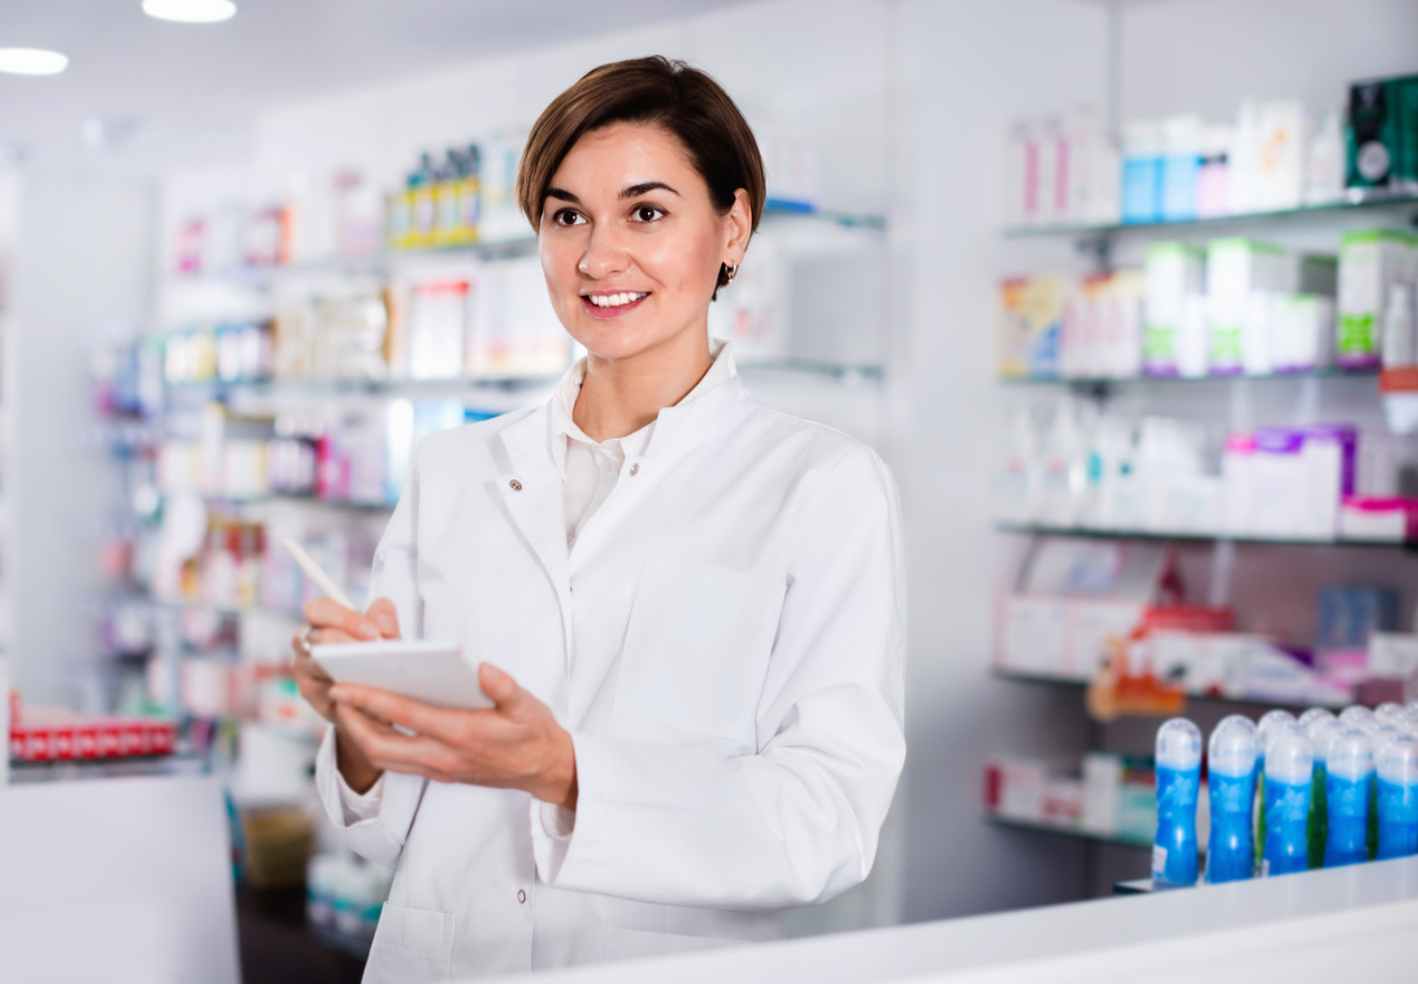 How to Overcome Imposter Syndrome in Pharmacy